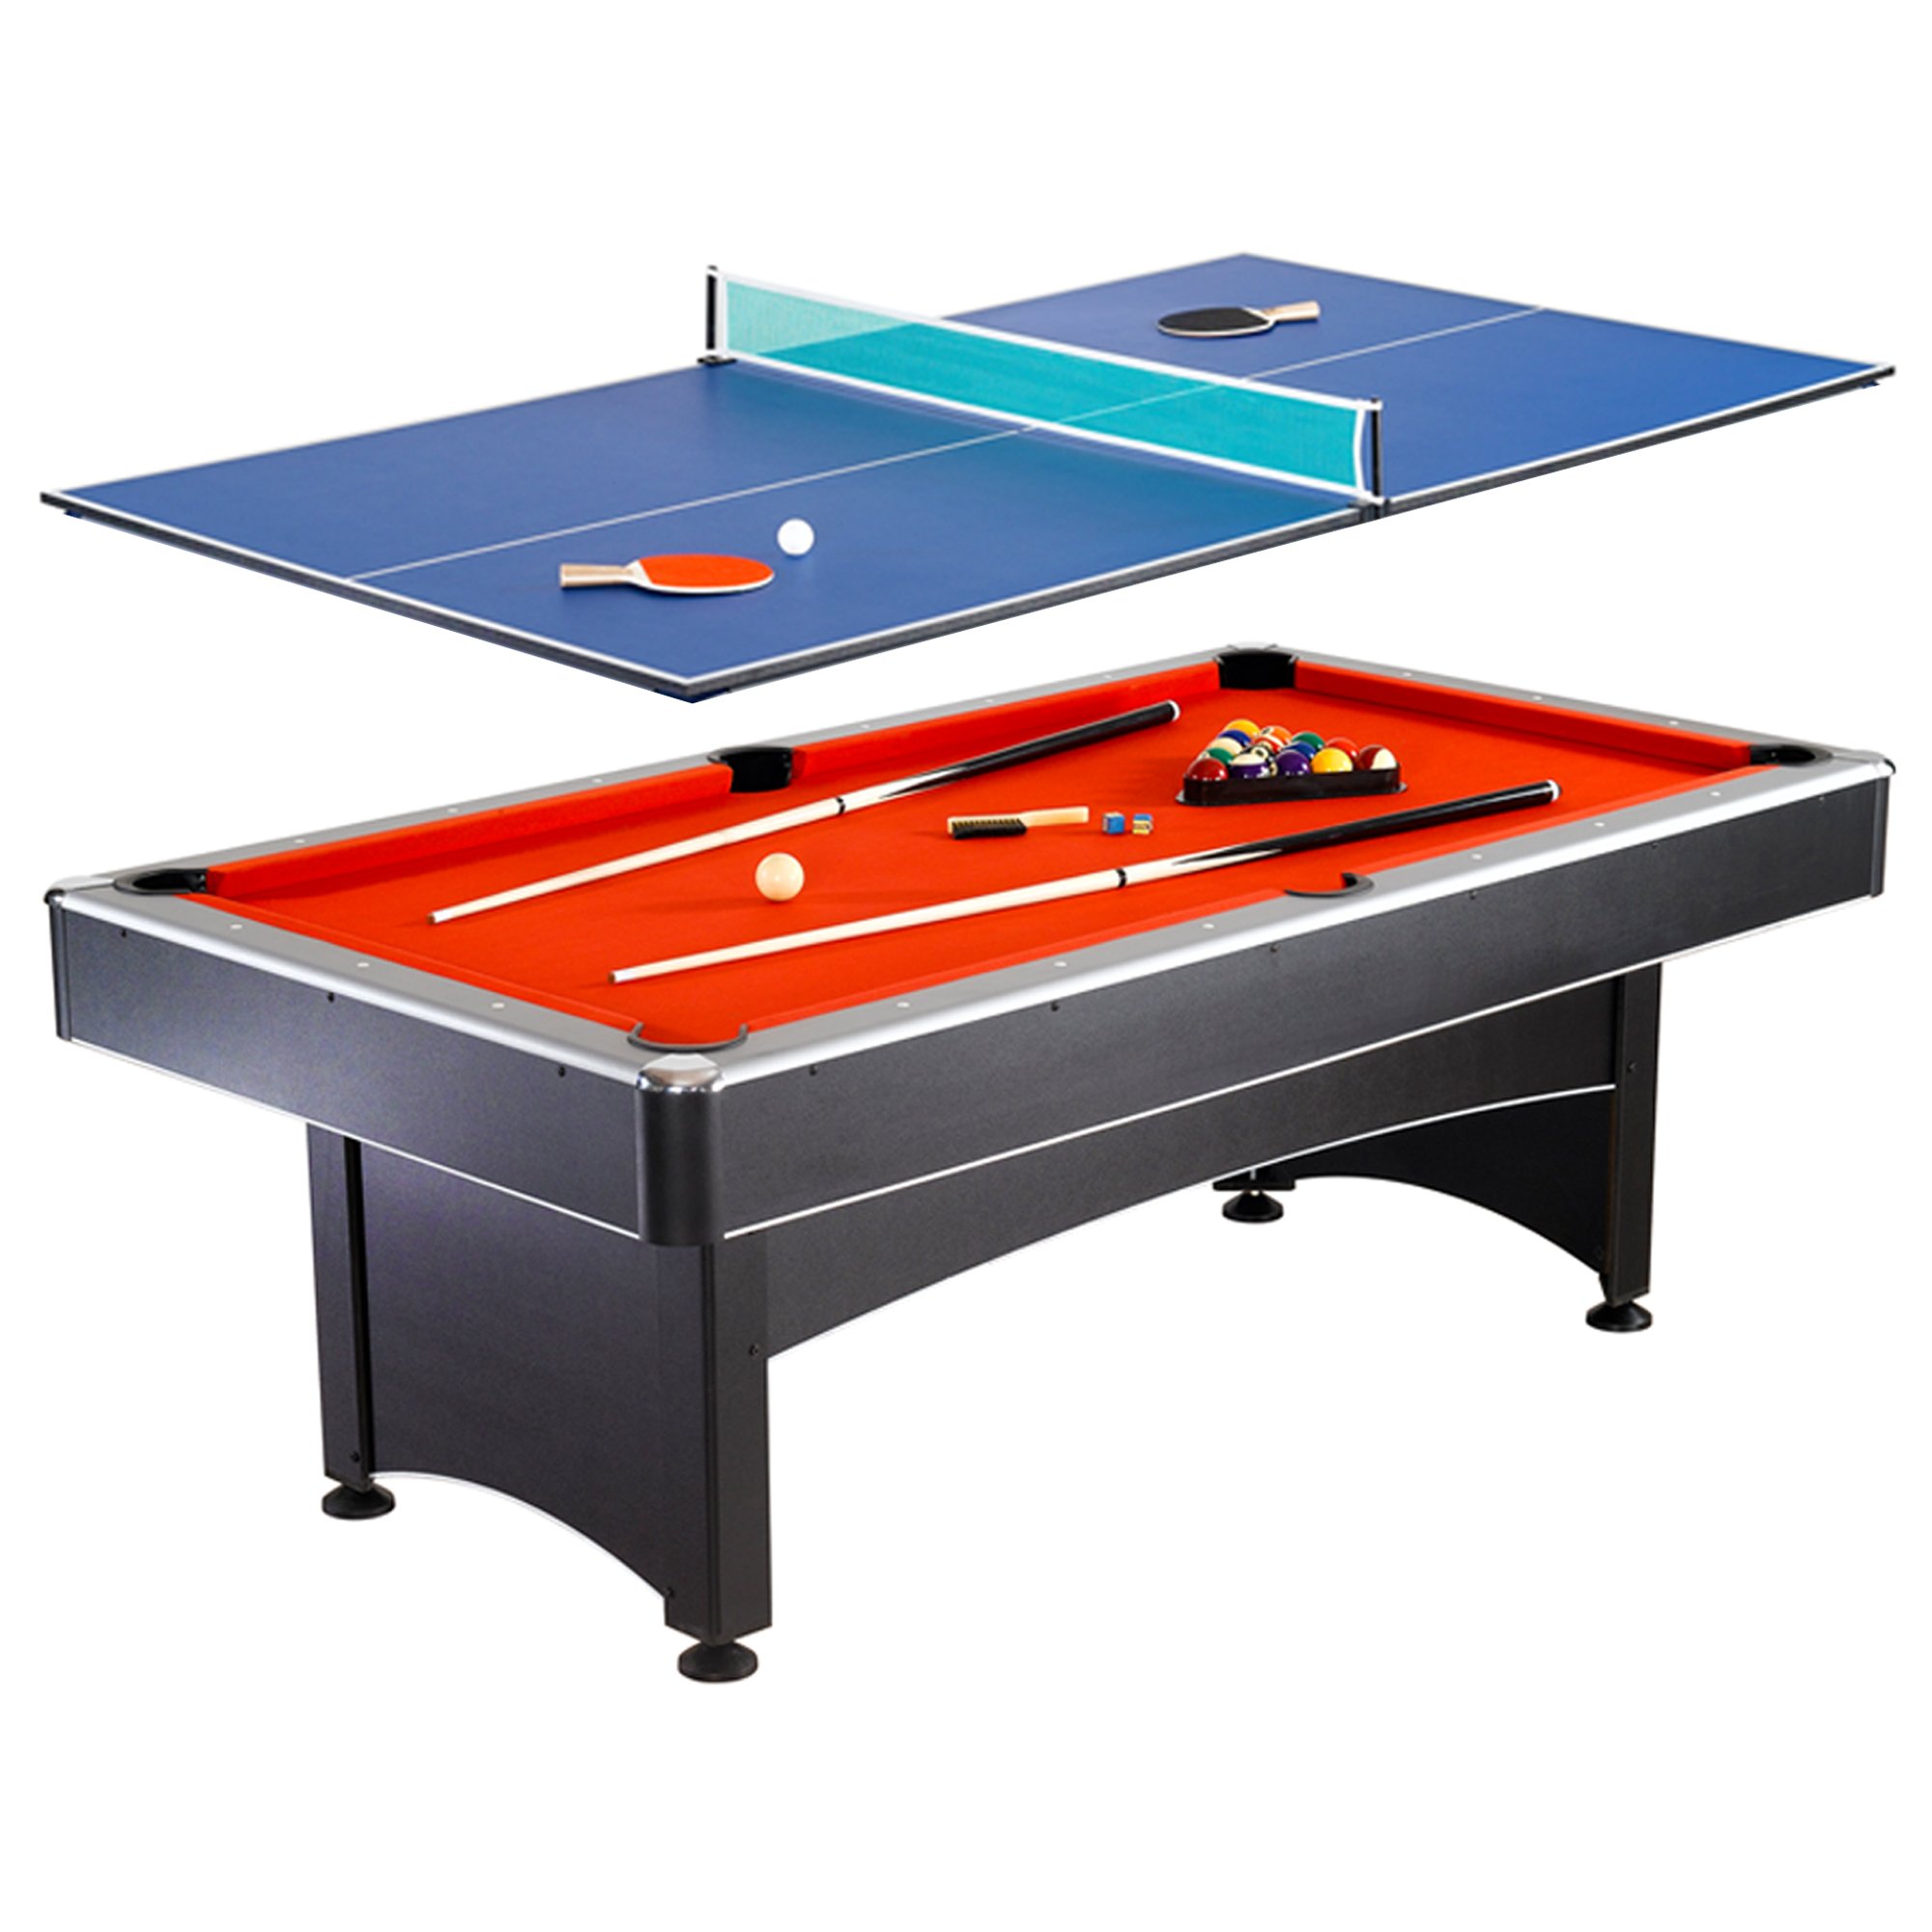 Hathaway&#153; Hathaway Maverick 7-foot Pool and Table Tennis Multi game with Red Felt and Blue Table Tennis Surface Includes cues, Paddles and